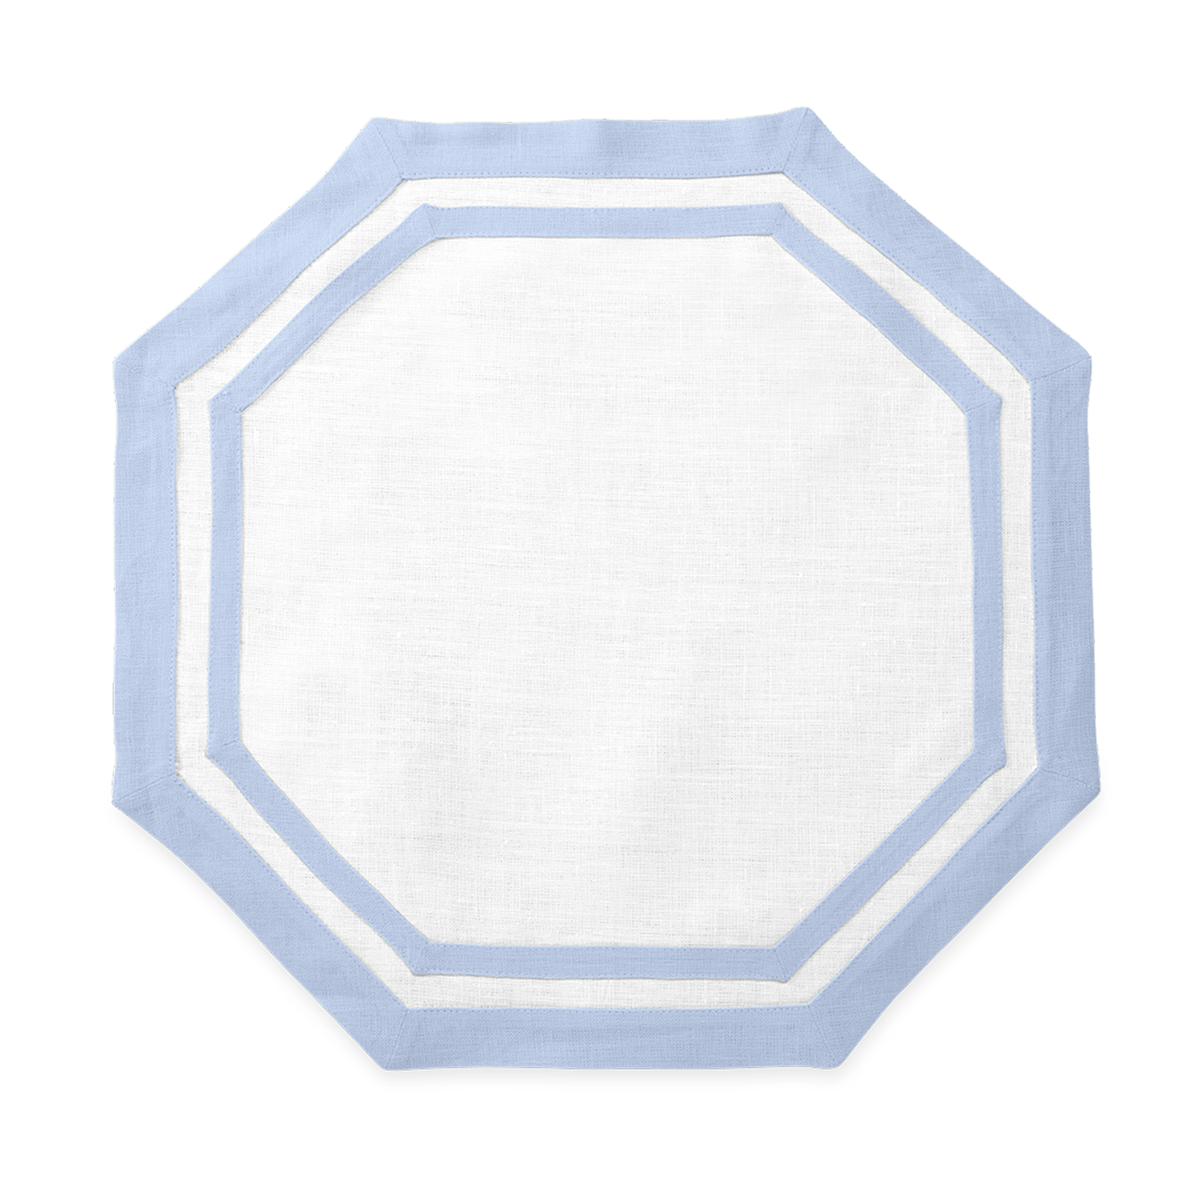 Silo Image of Matouk Double Border Octagon Placemat in Color Ice Blue